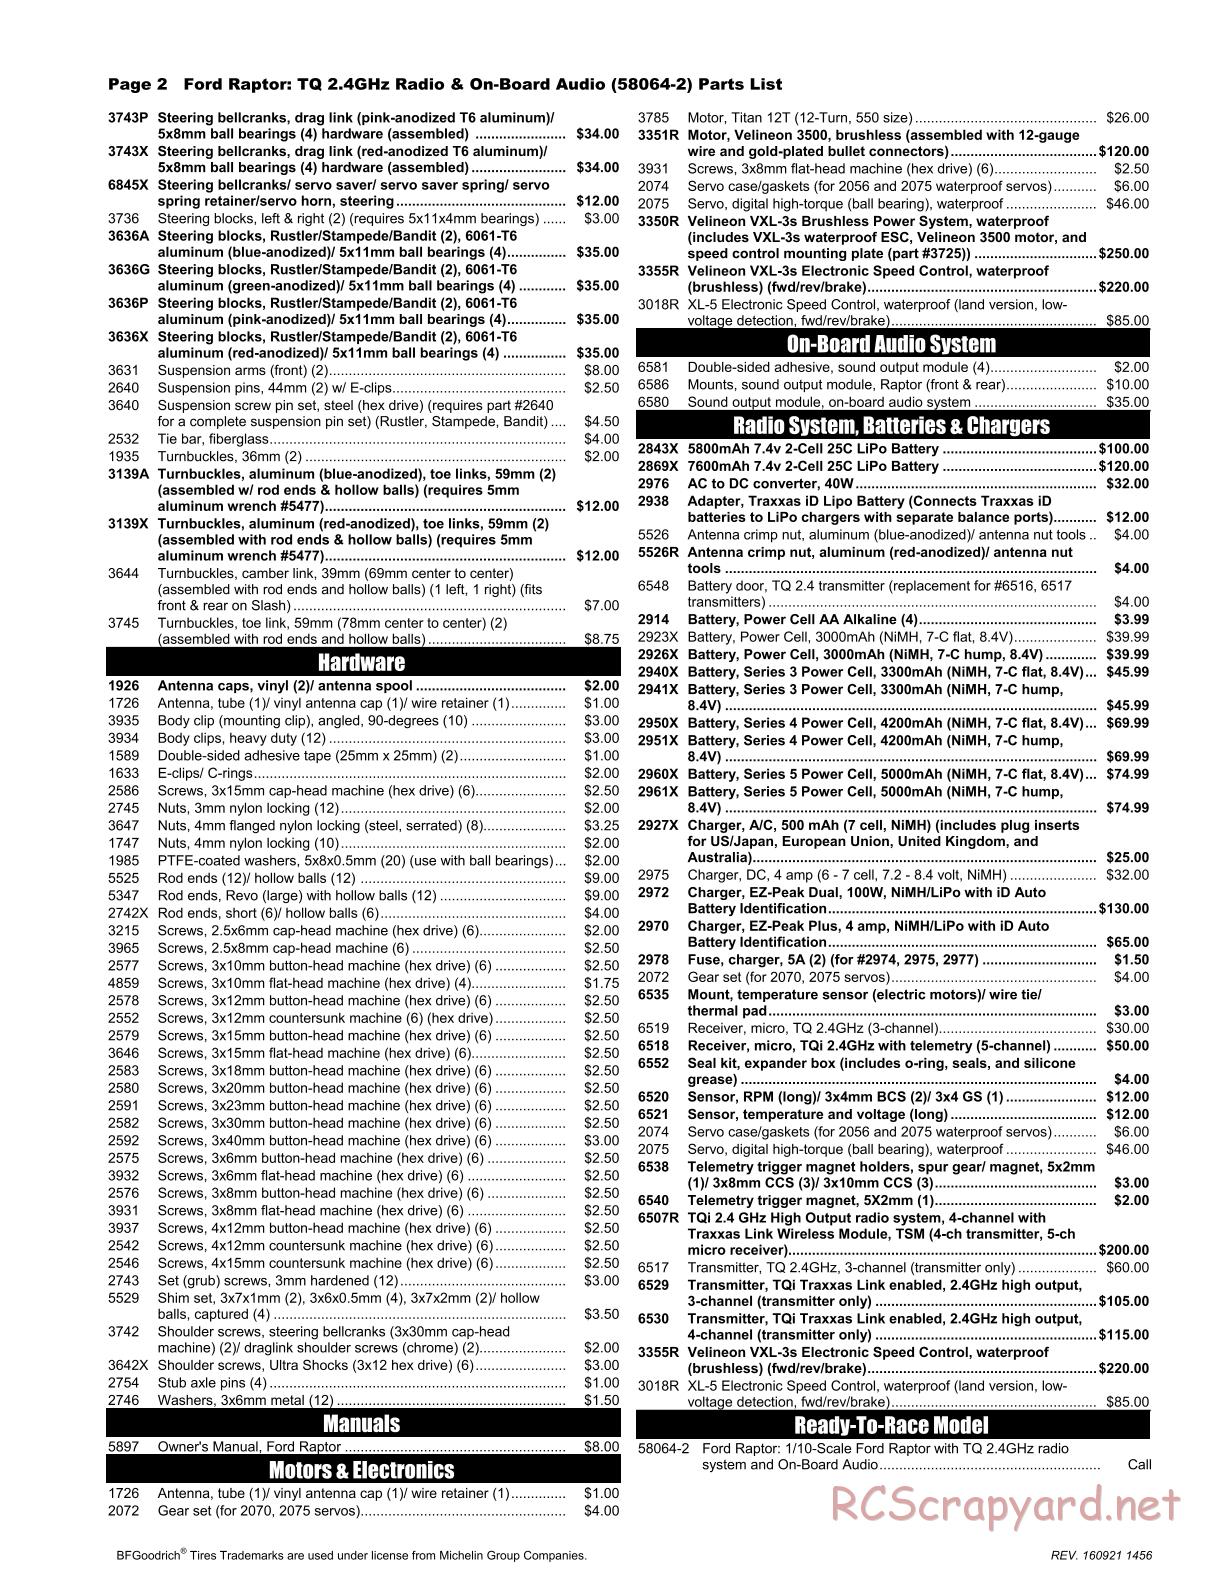 Traxxas - Ford F-150 SVT Raptor OBA (2015) - Parts List - Page 2